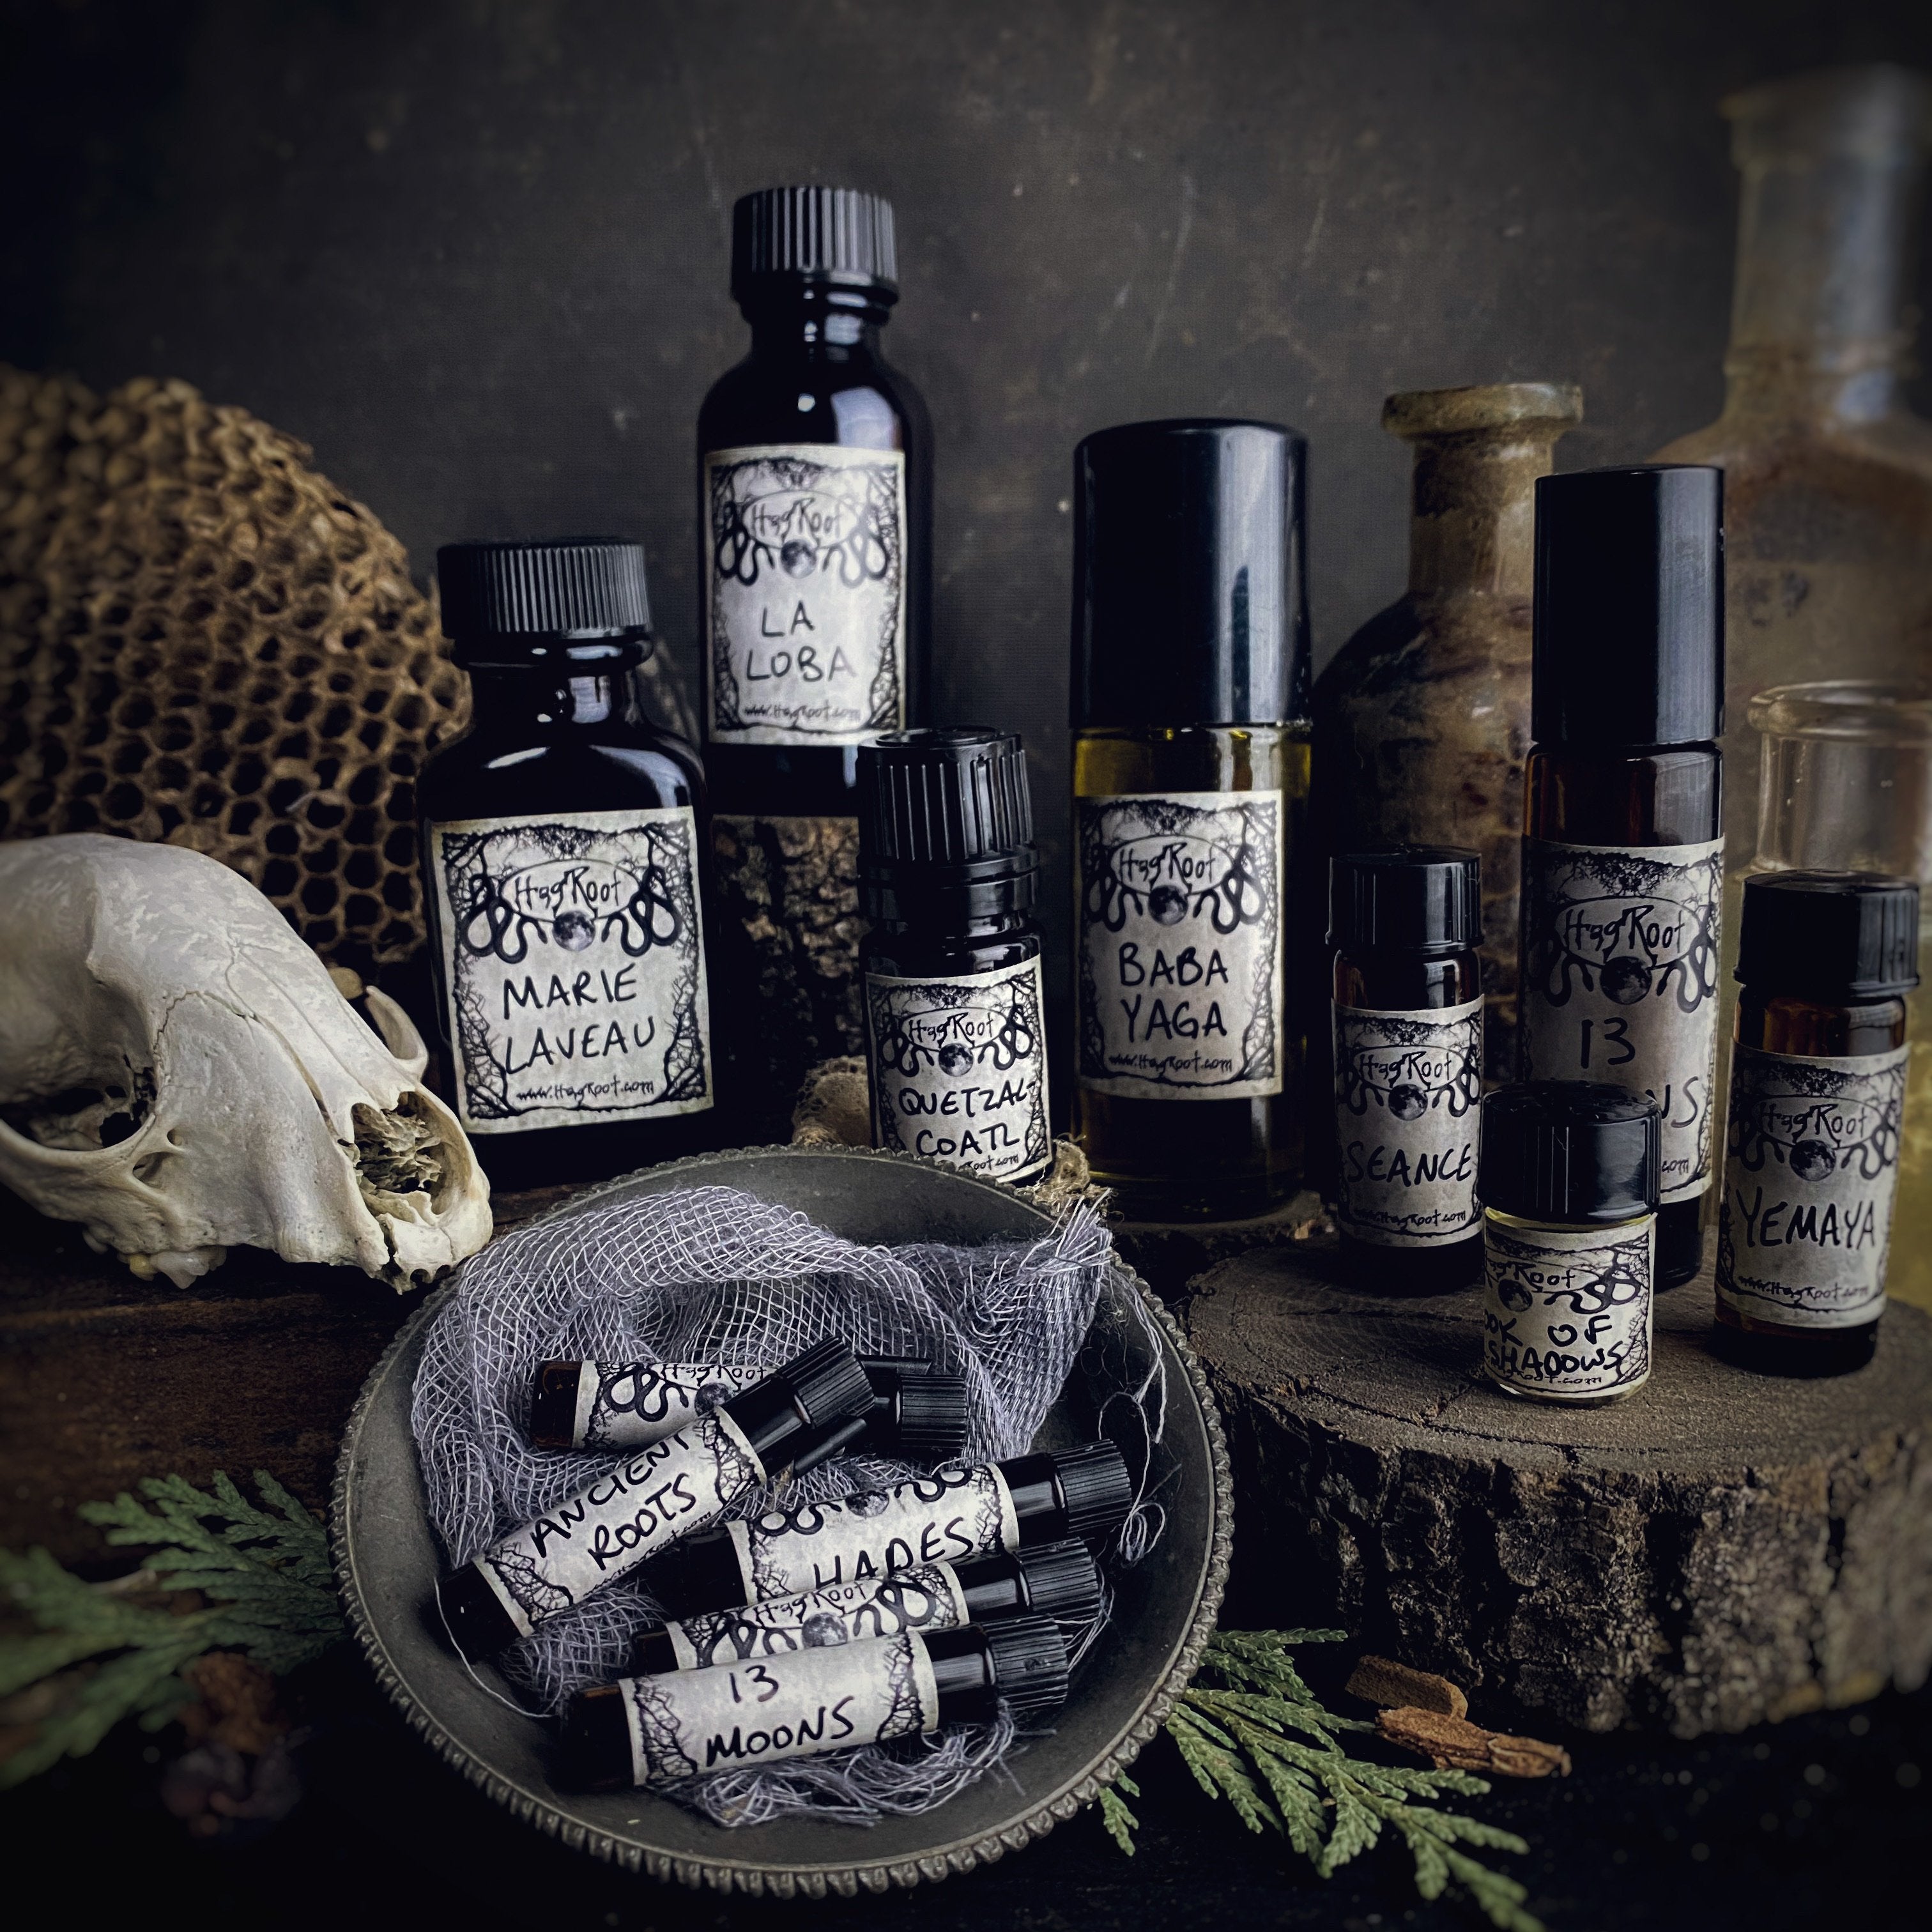 HULDRA-(Dark Spices, Haunted Woods, Warm Vanilla)-Perfume, Cologne, Anointing, Ritual Oil